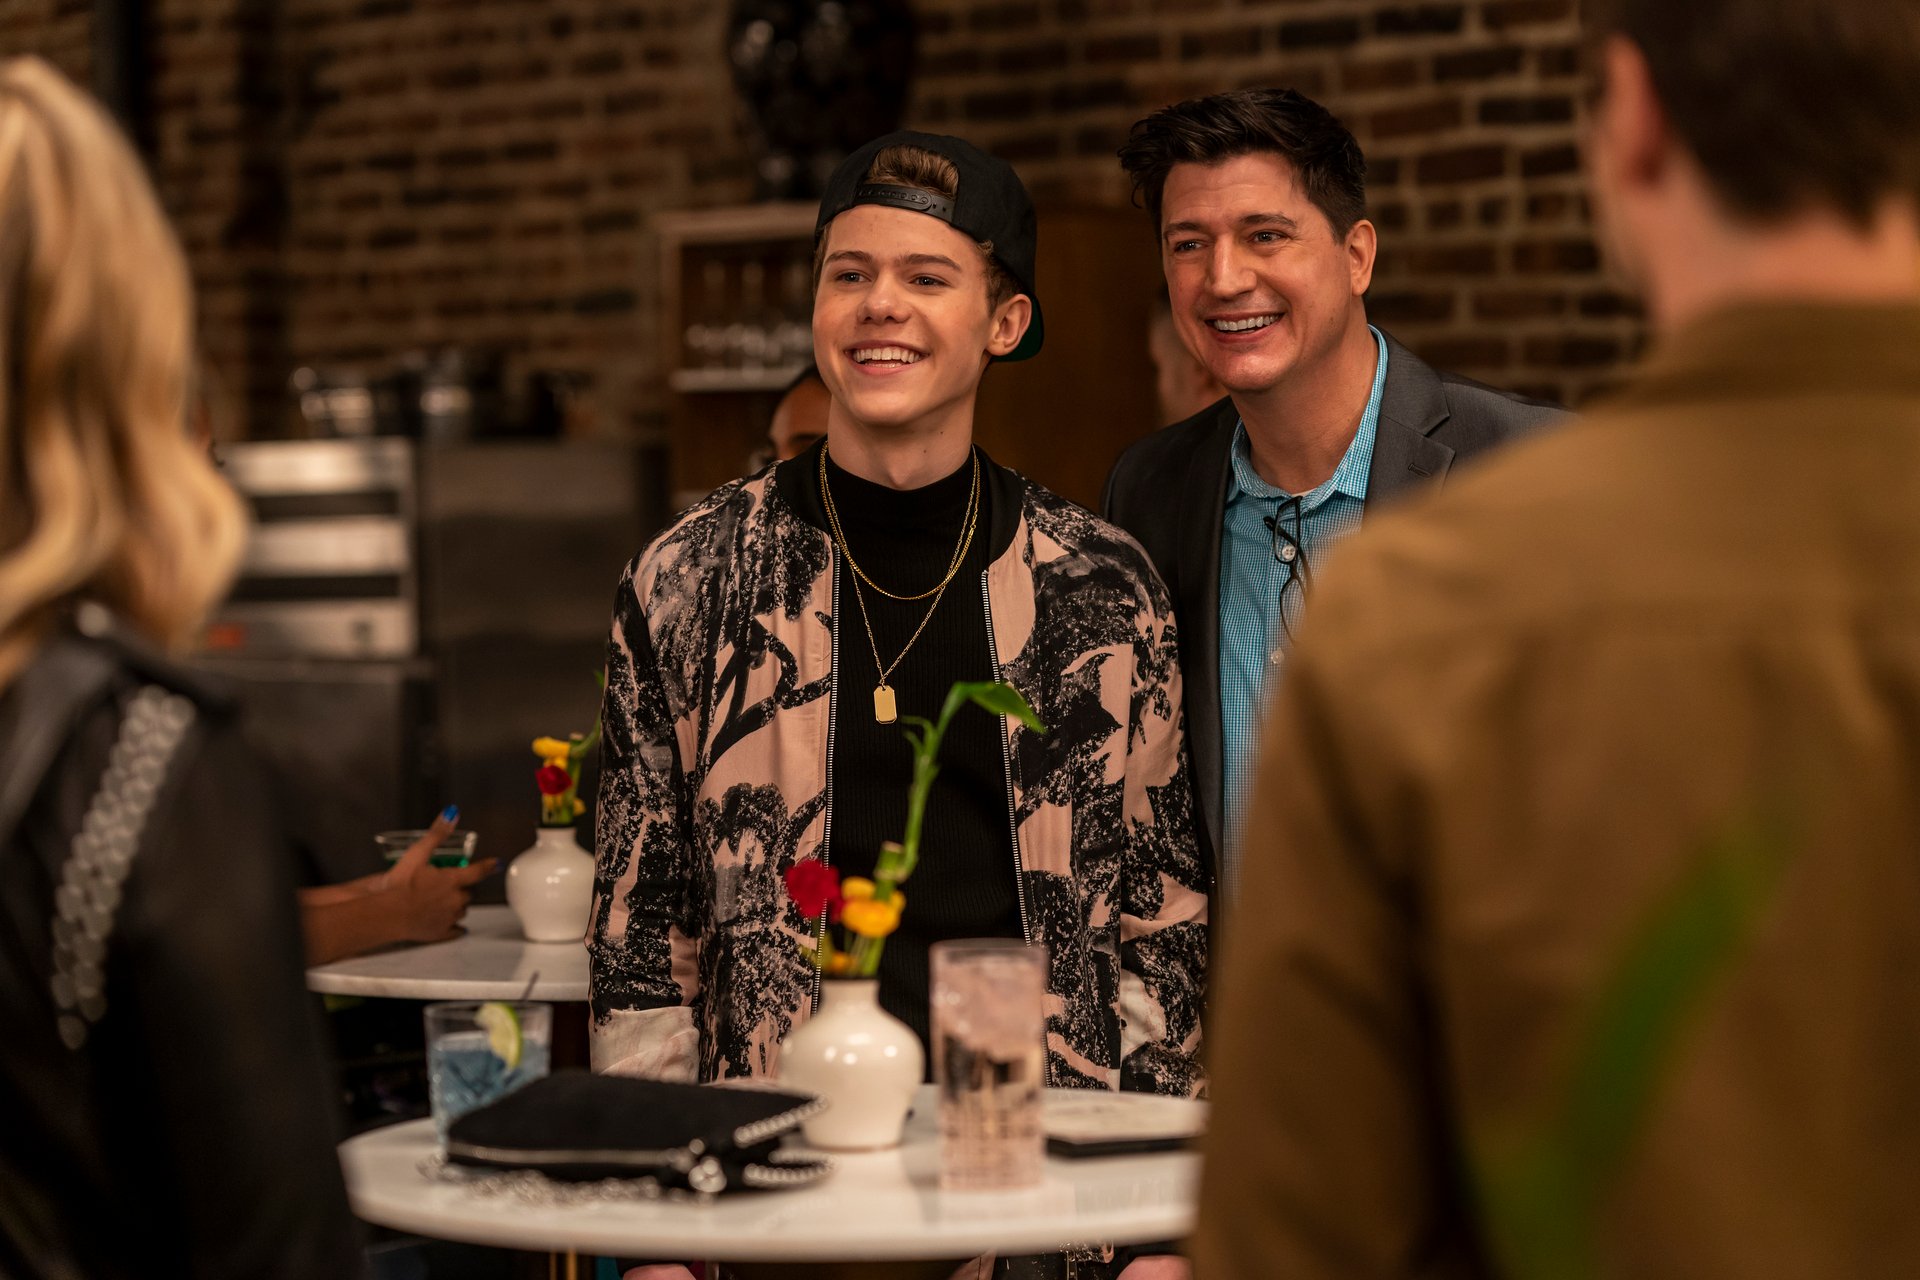 Case Walker and Ken Marino stand in front of a table with a vase of flowers and a drink.